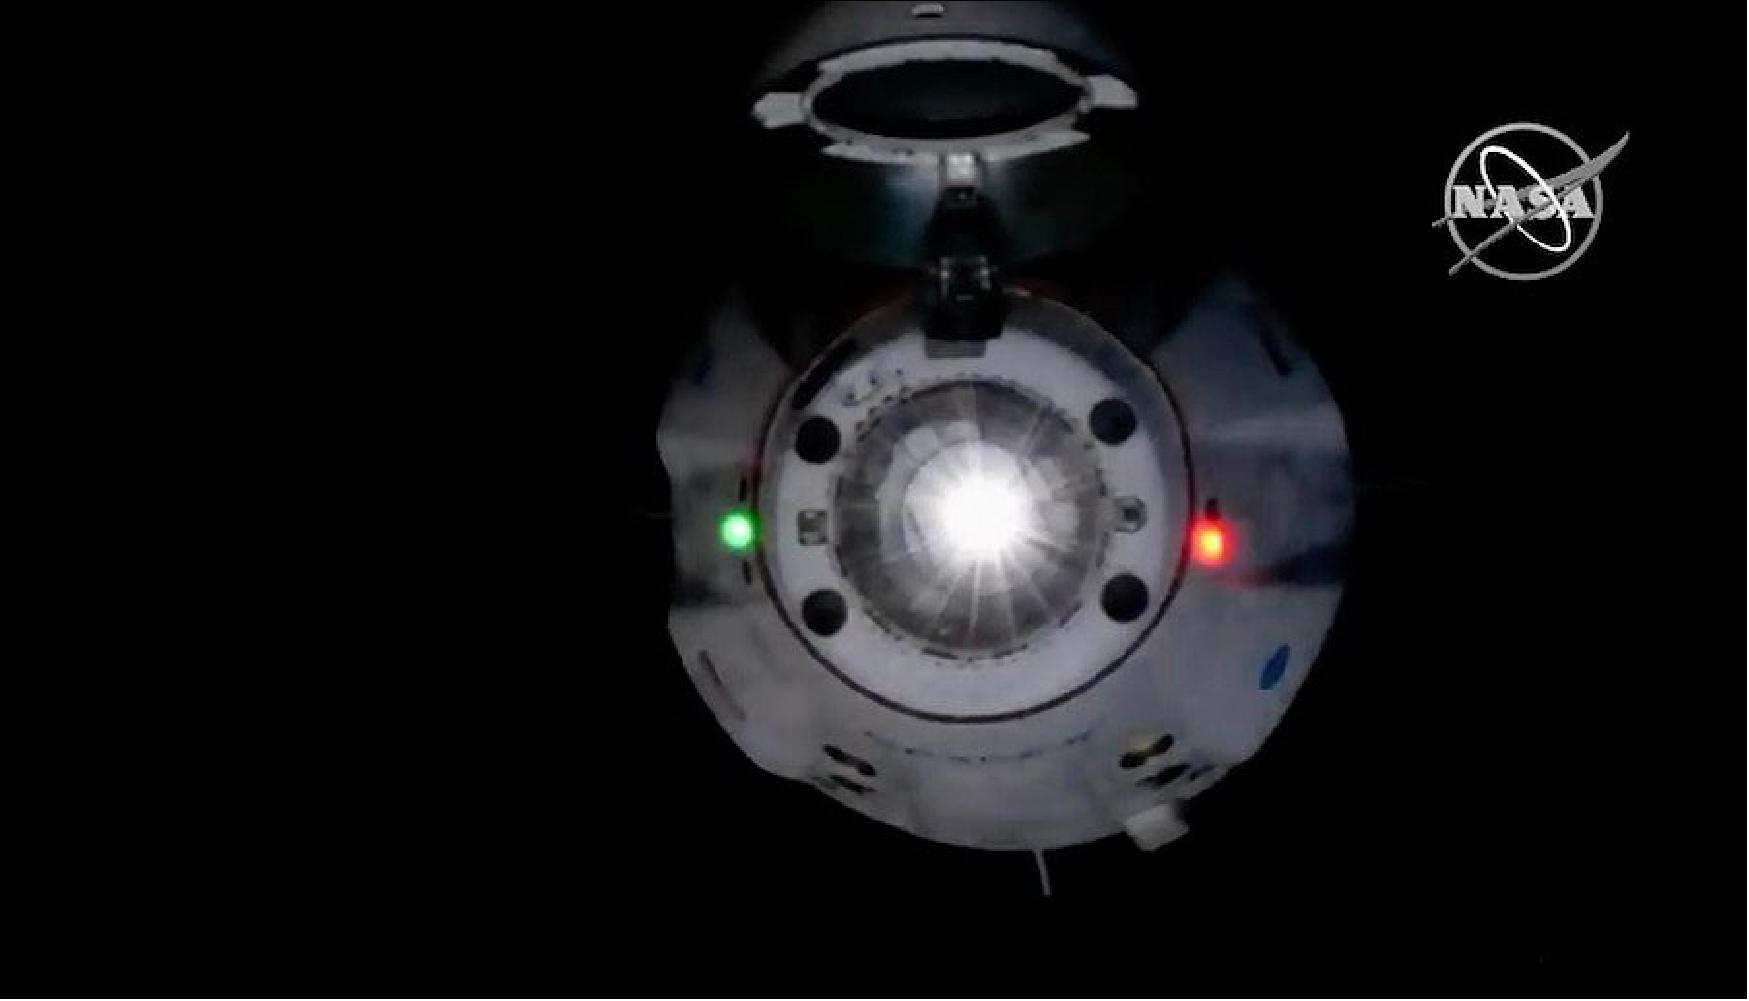 Figure 35: SpaceX’s Crew Dragon spacecraft closes in for docking Sunday at the International Space Station (image credit: NASA TV/Spaceflight Now)